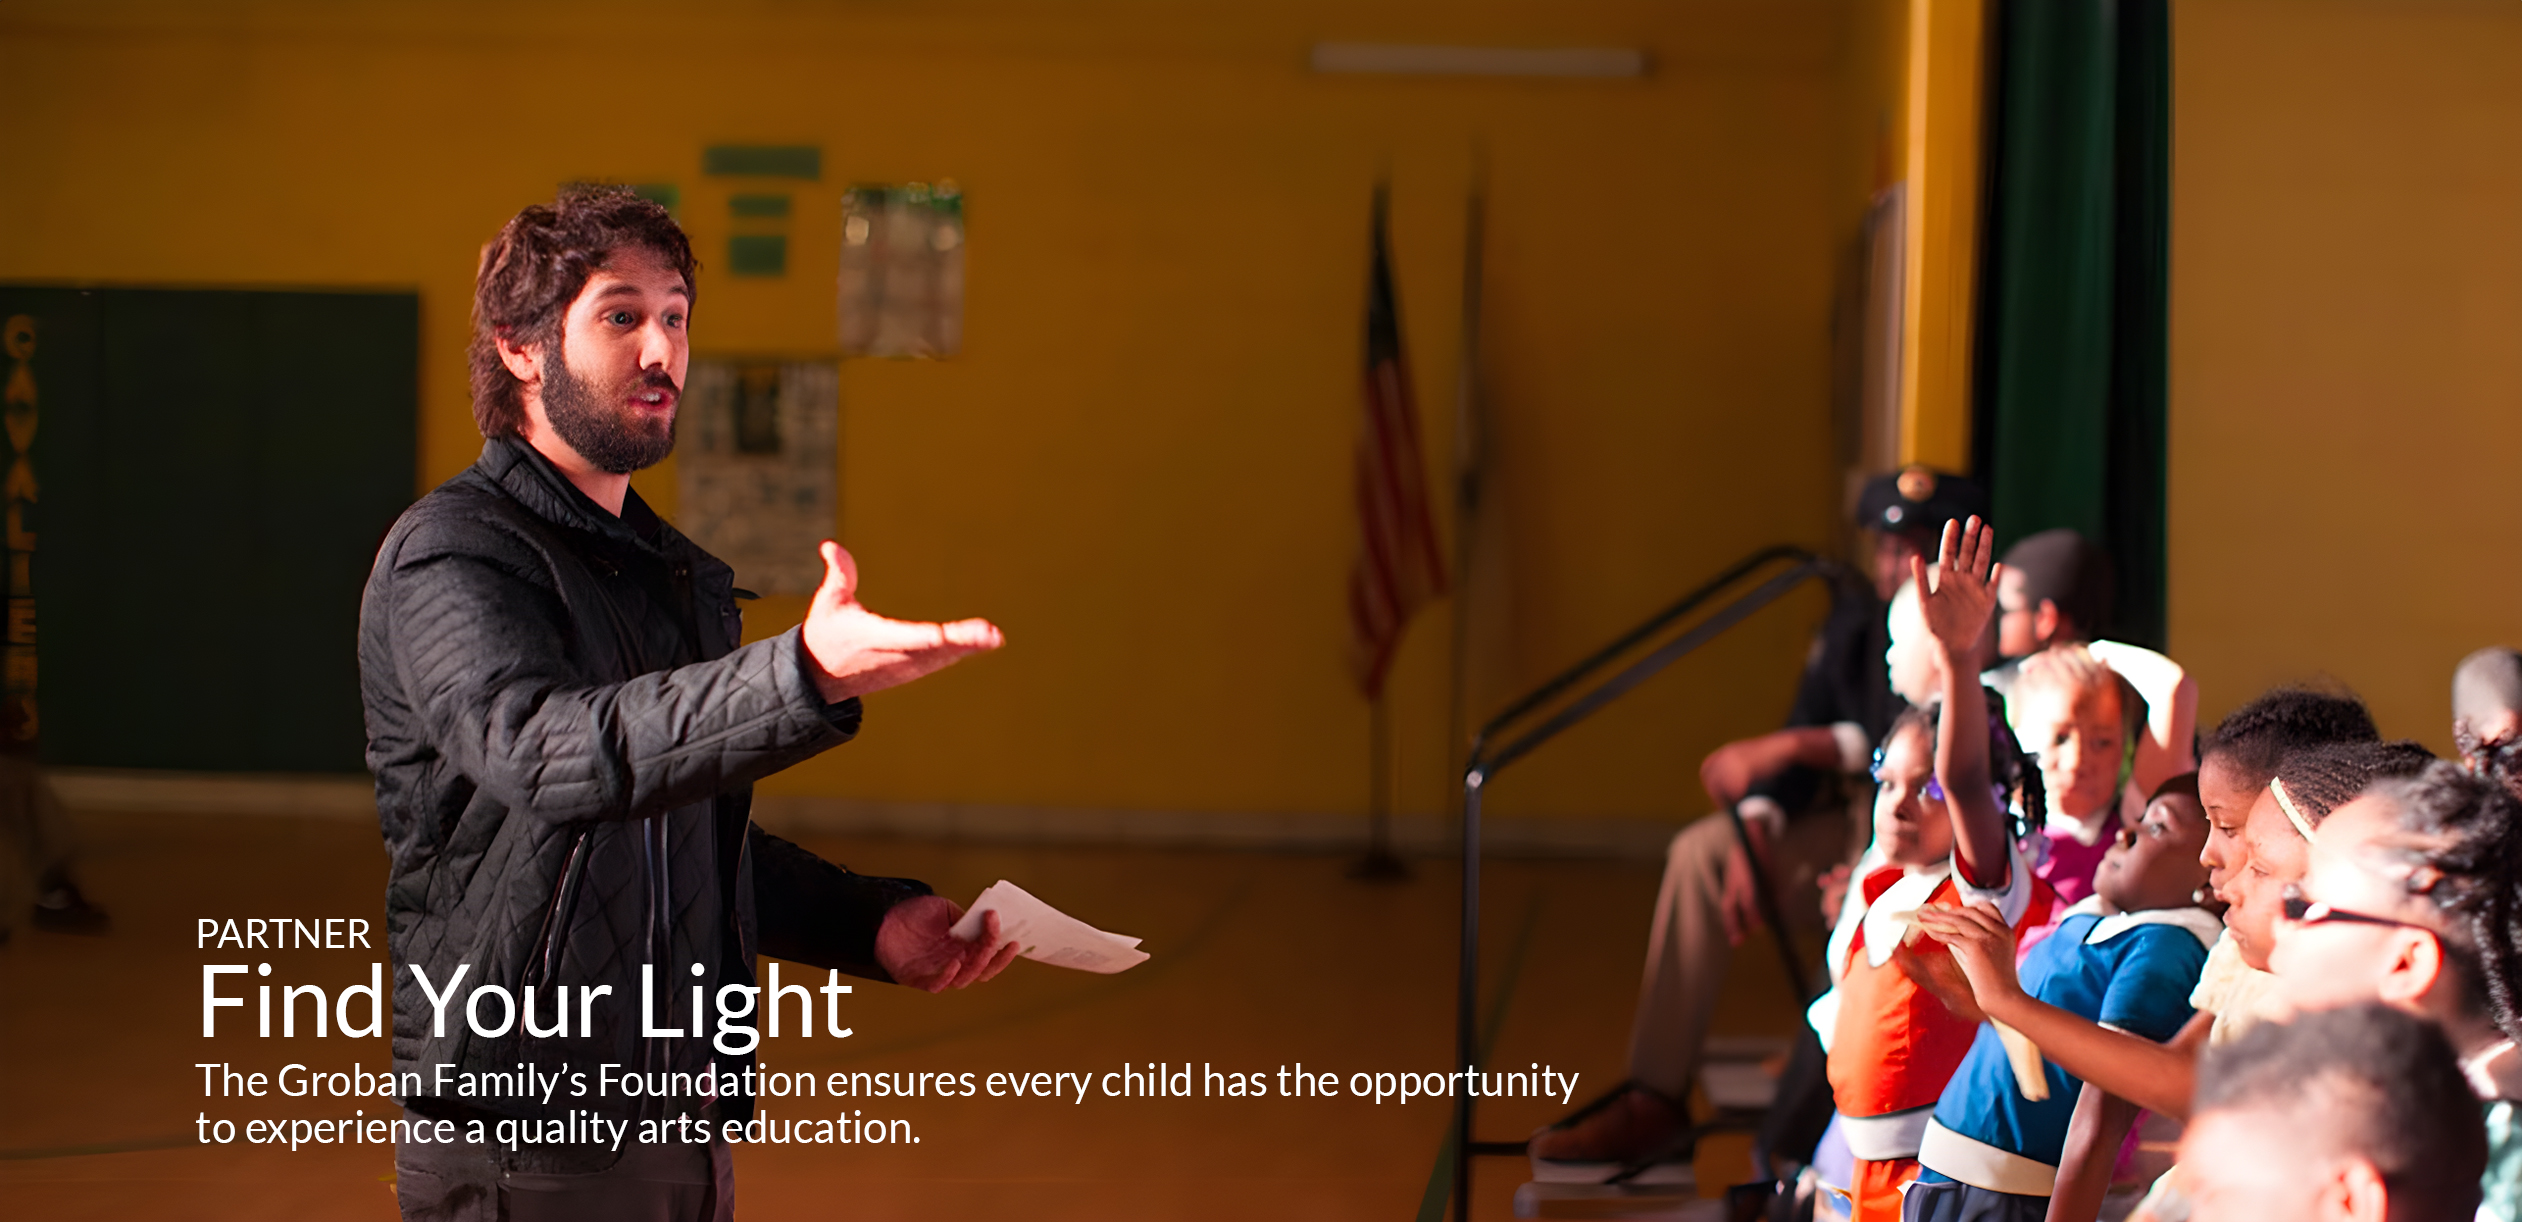 PARTNER Find Your Light Josh Groban’s Foundation ensures every child has the opportunity to experience a quality arts education